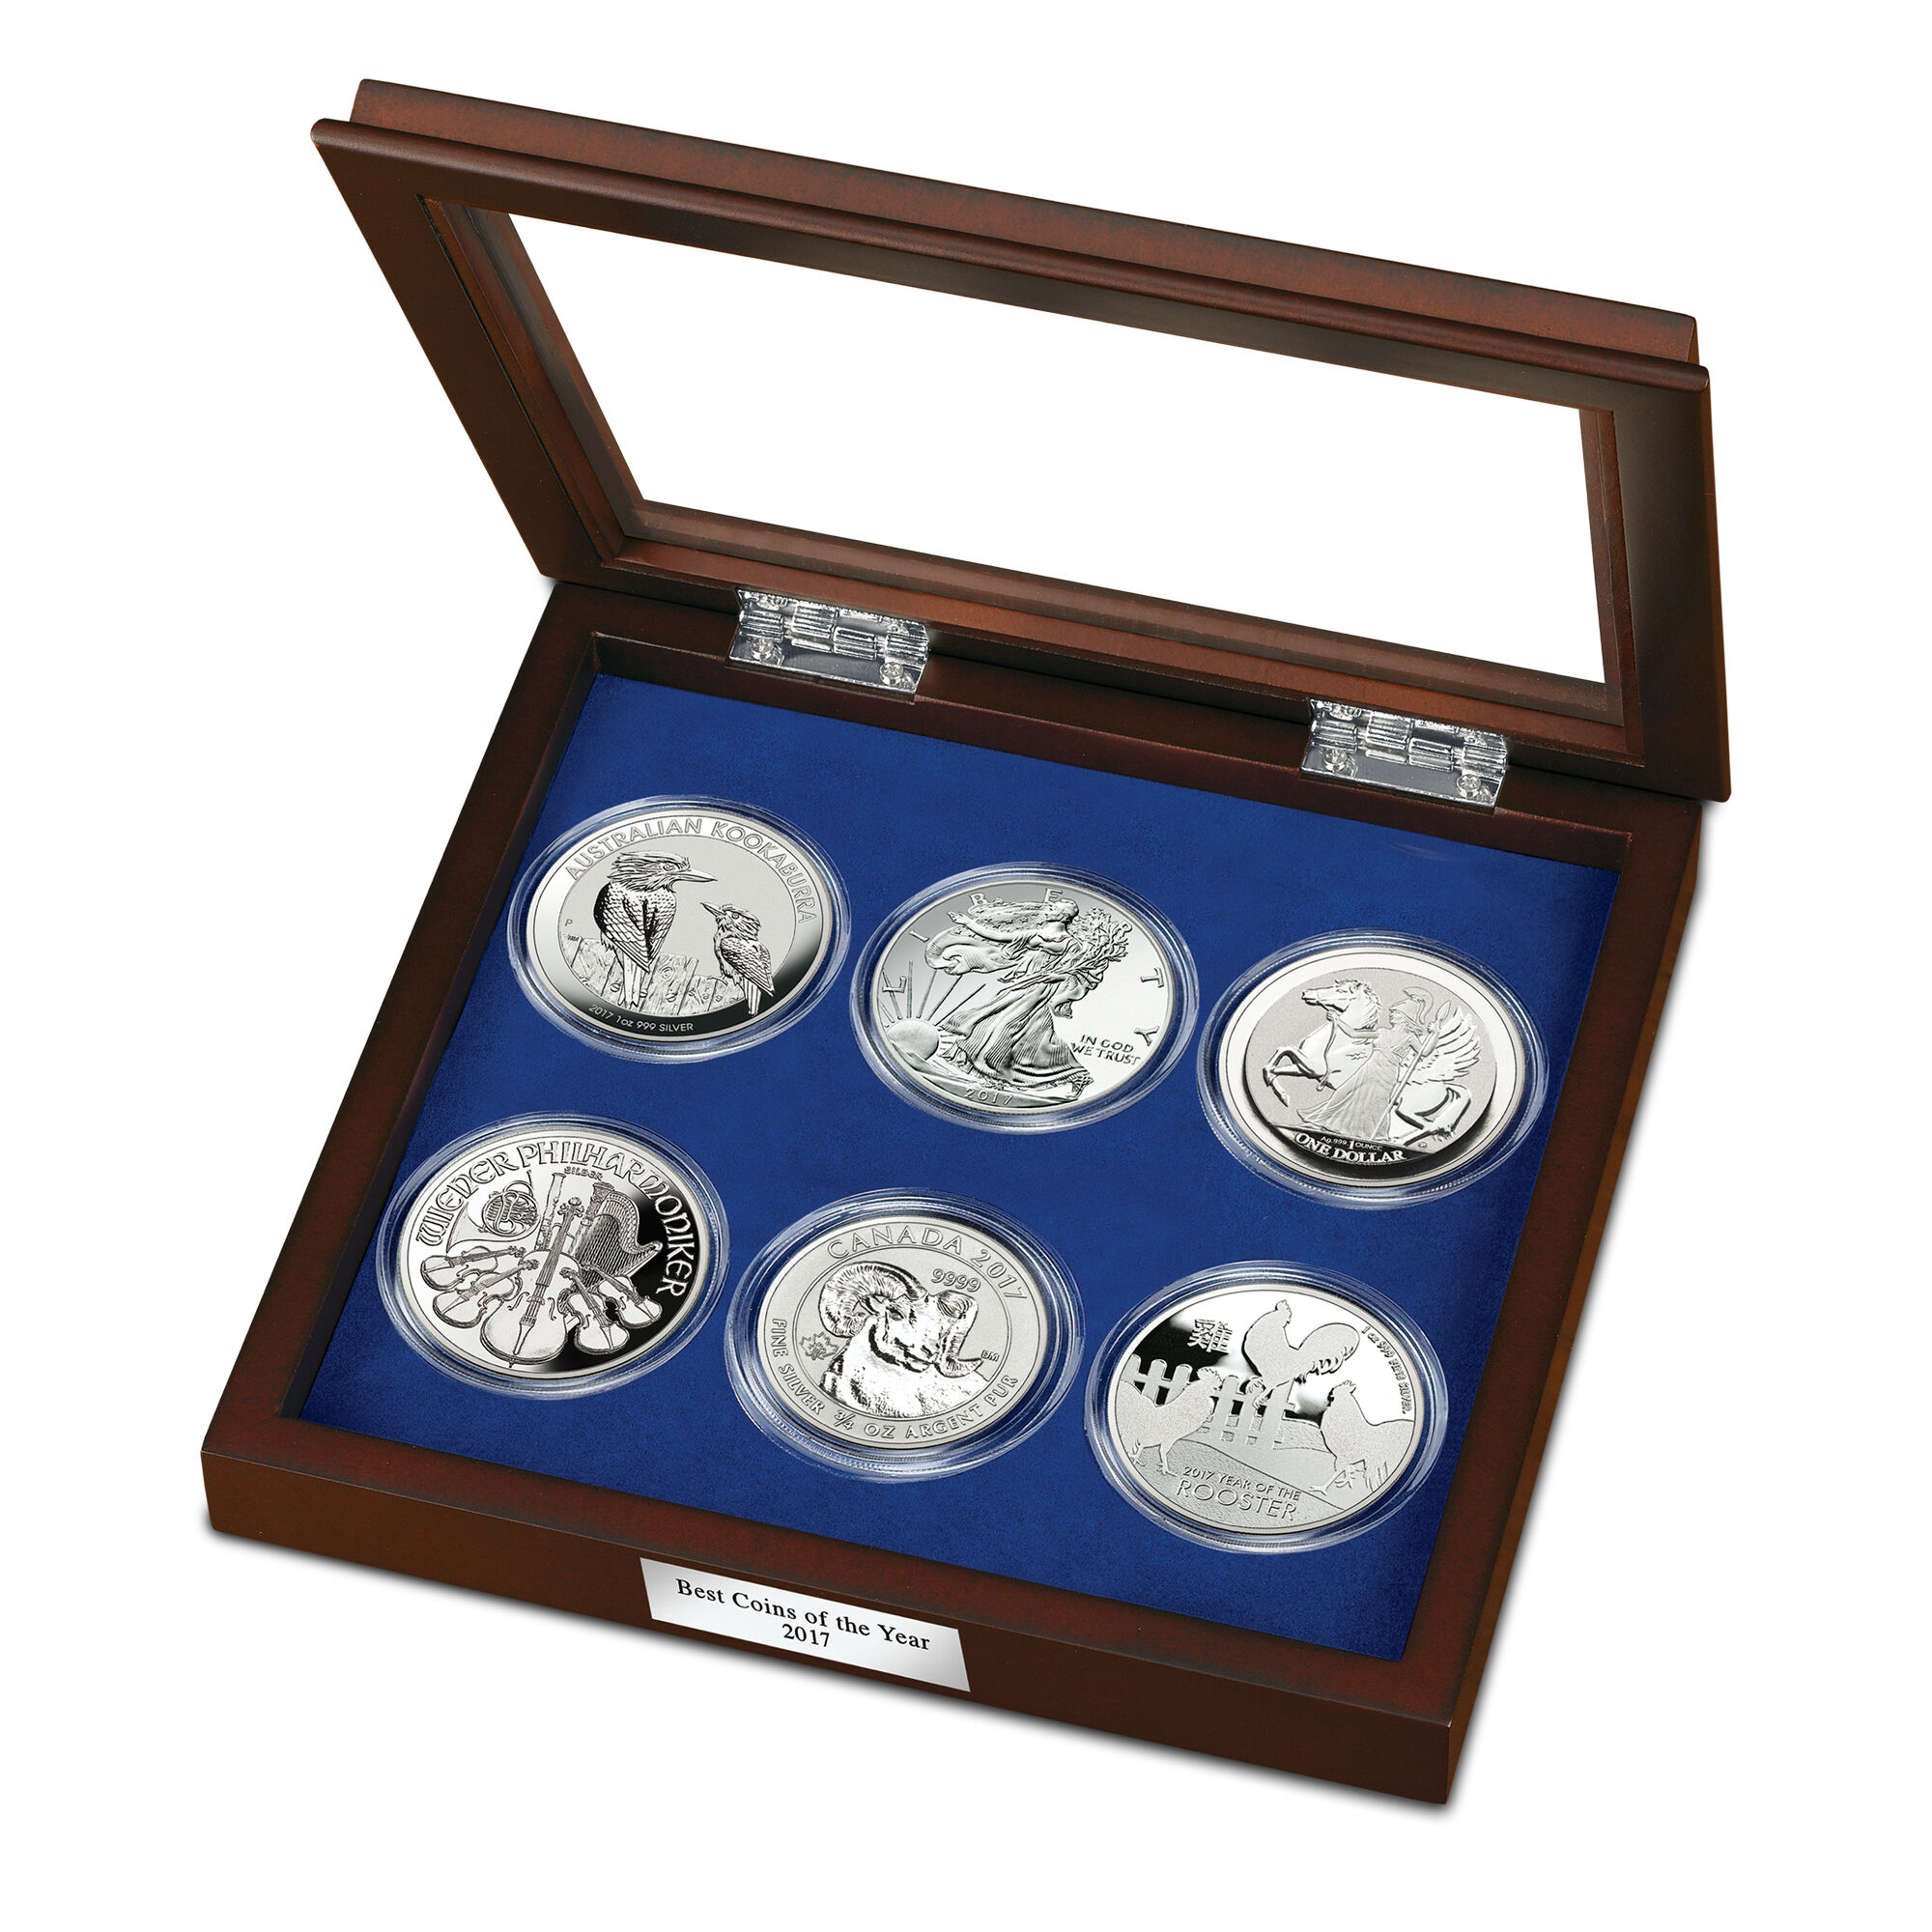 Best Coins of the Year 2017 5161 0202 g display